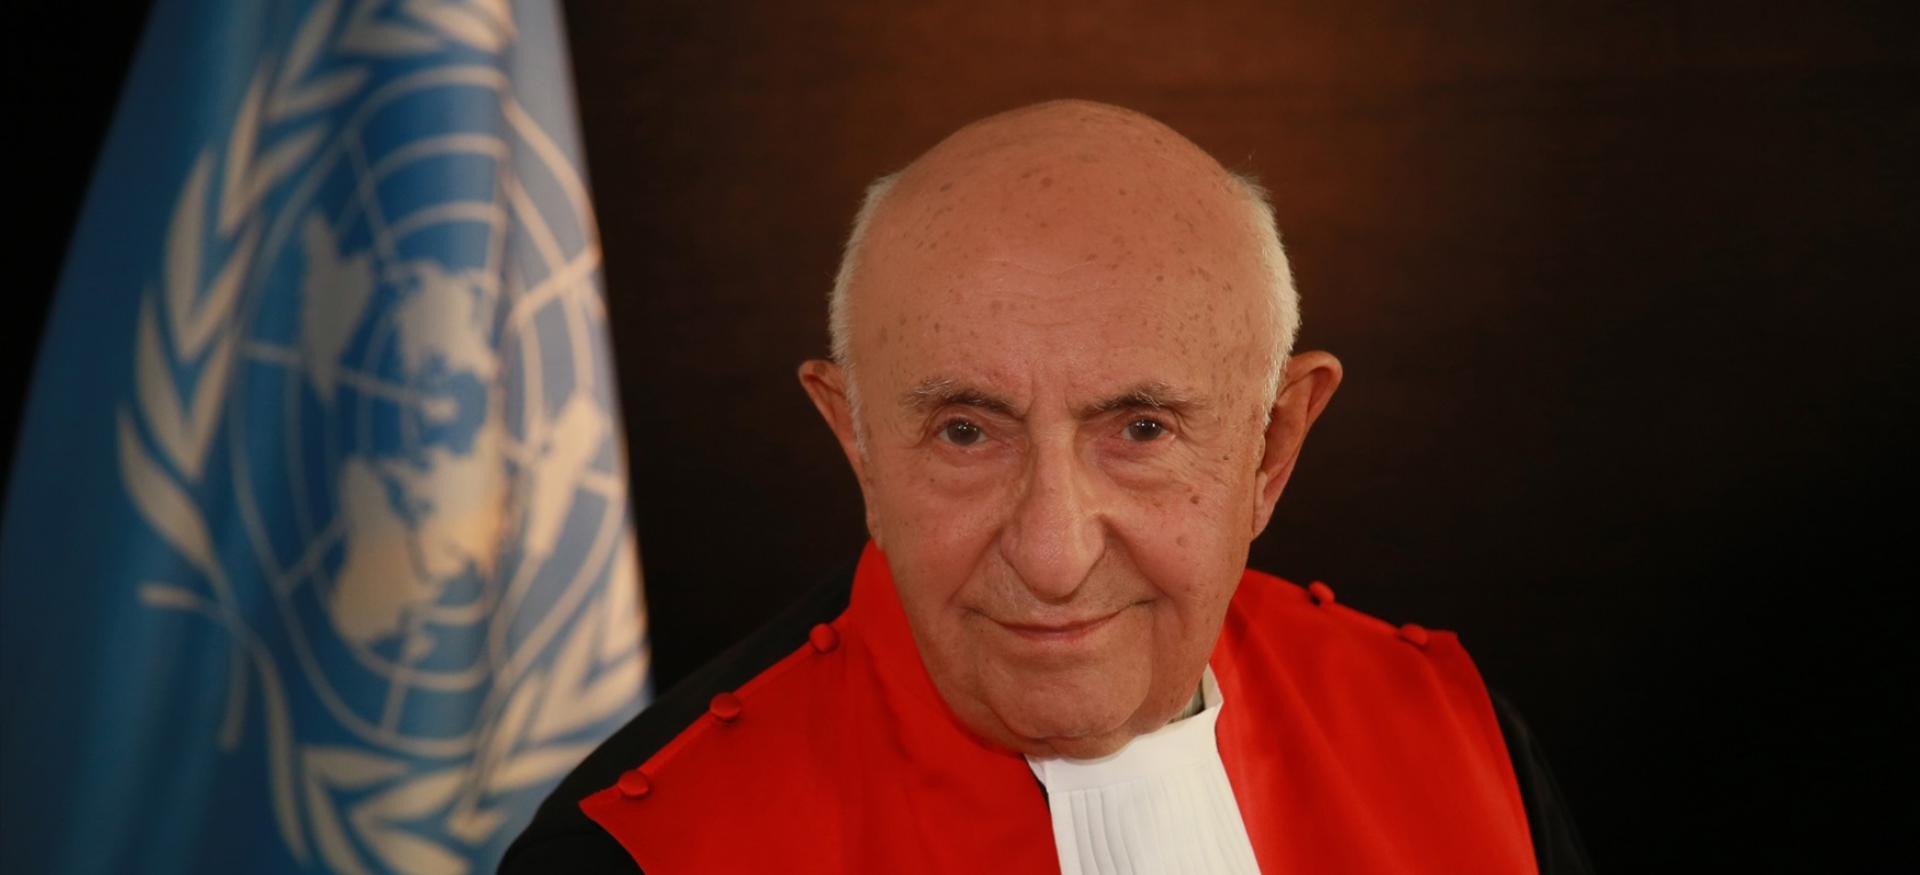 Judge Ted Meron wears his international criminal court robe and stands in front of a United Nations flag.